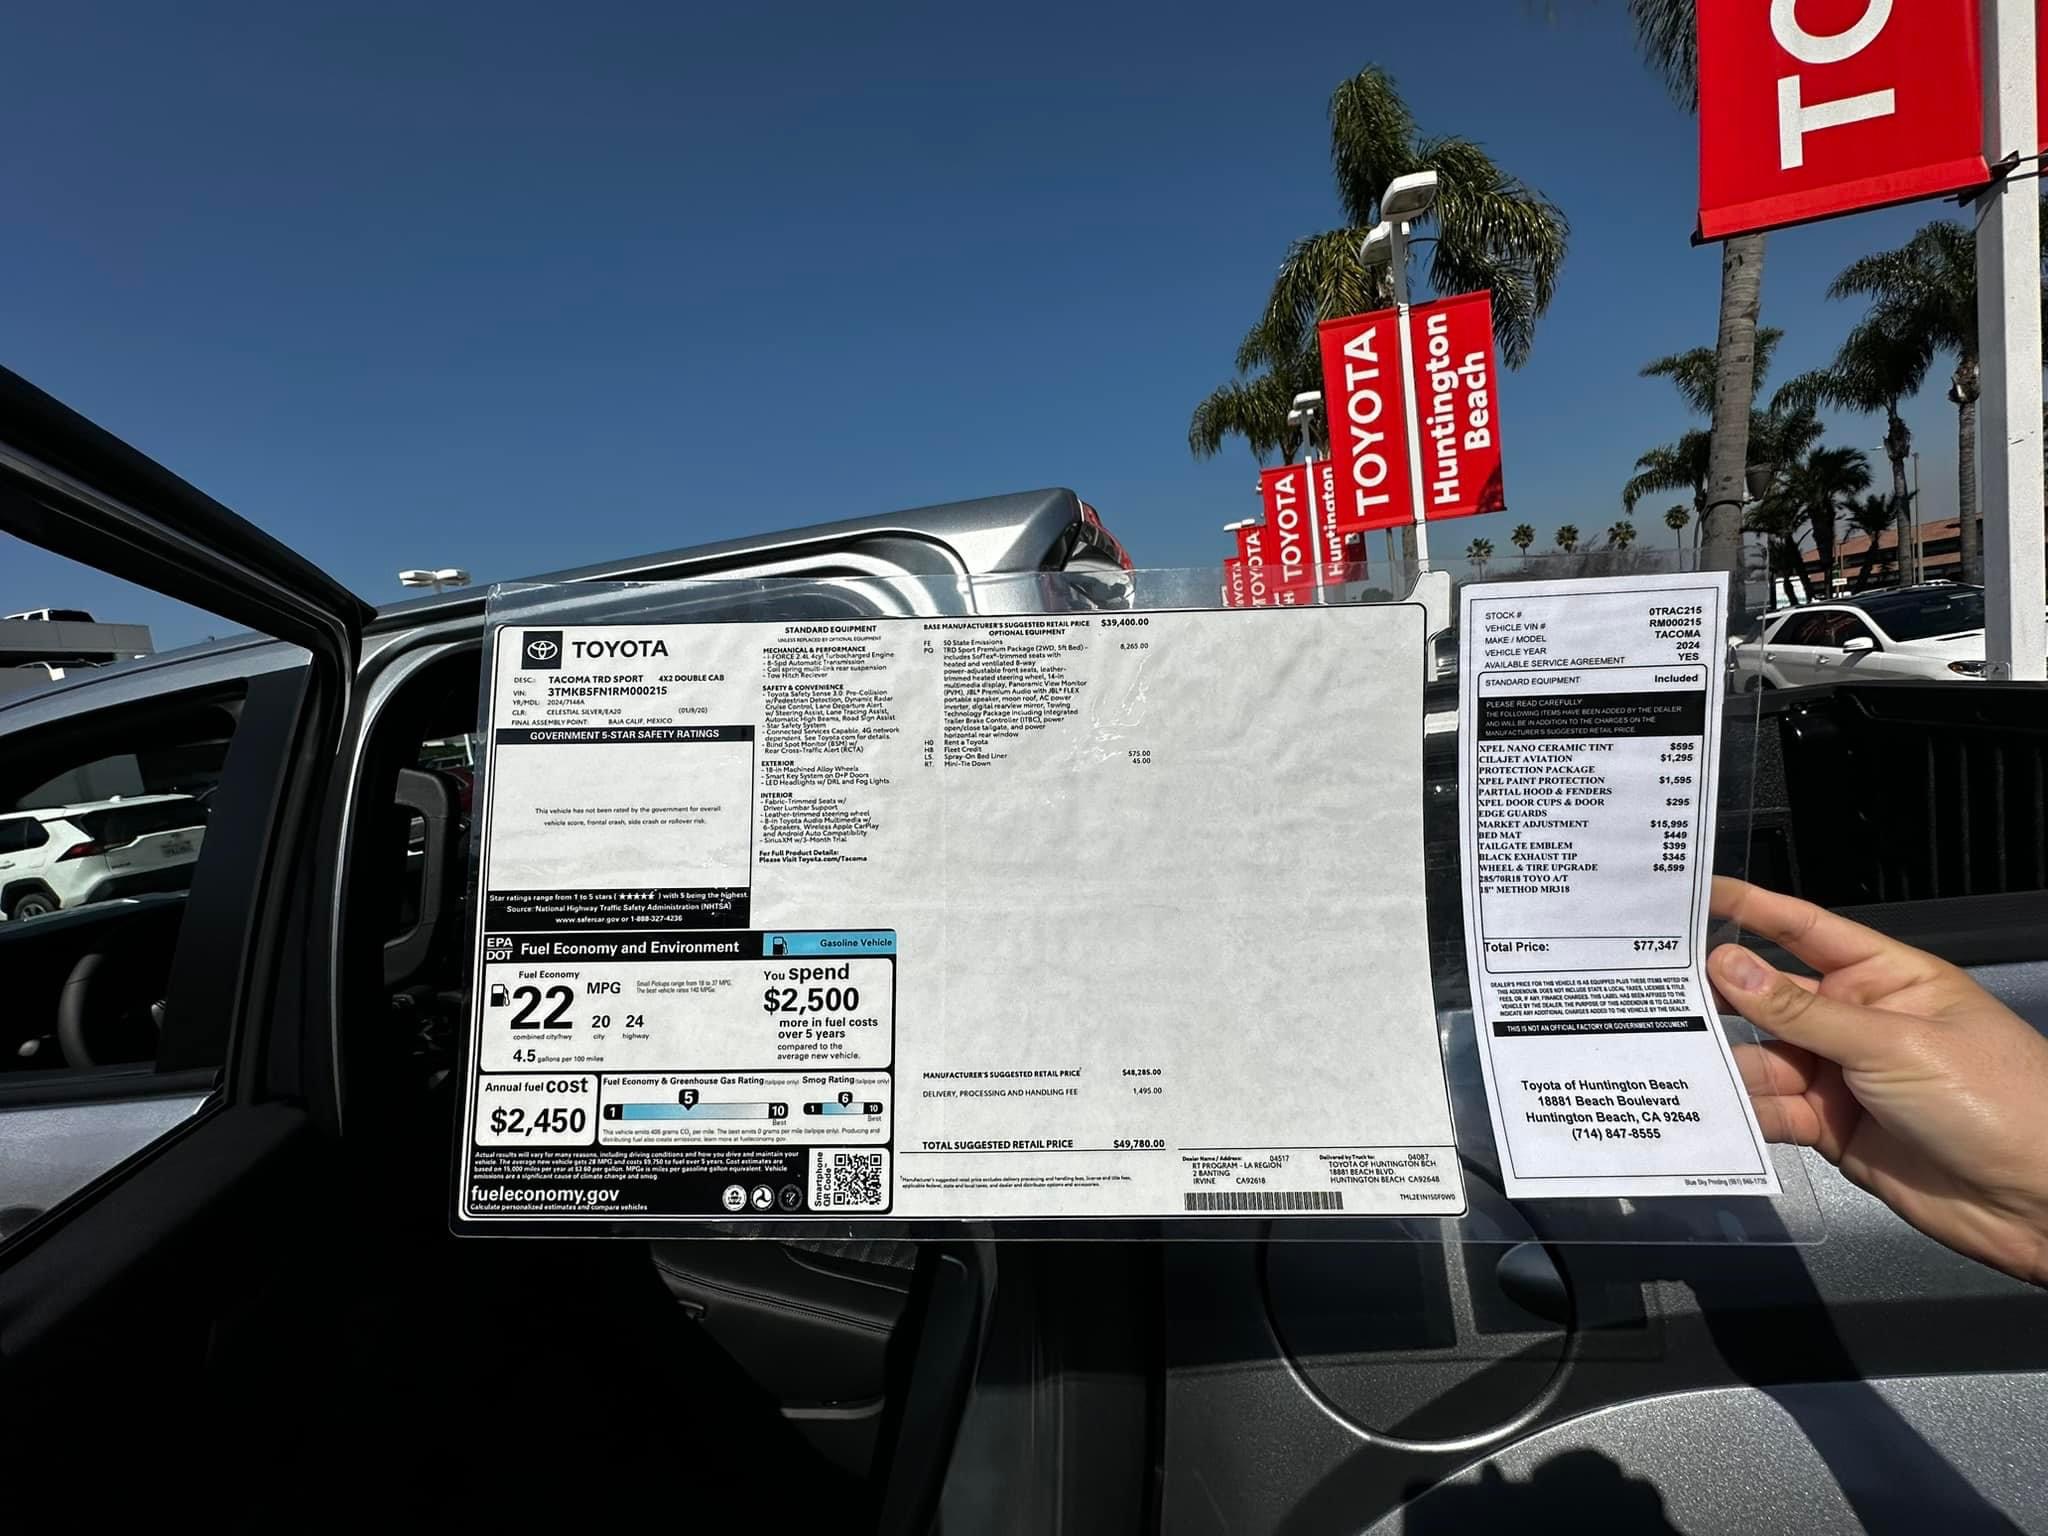 2024 Tacoma Toyota of Huntington Beach in CA Ripping People off IMG_0678